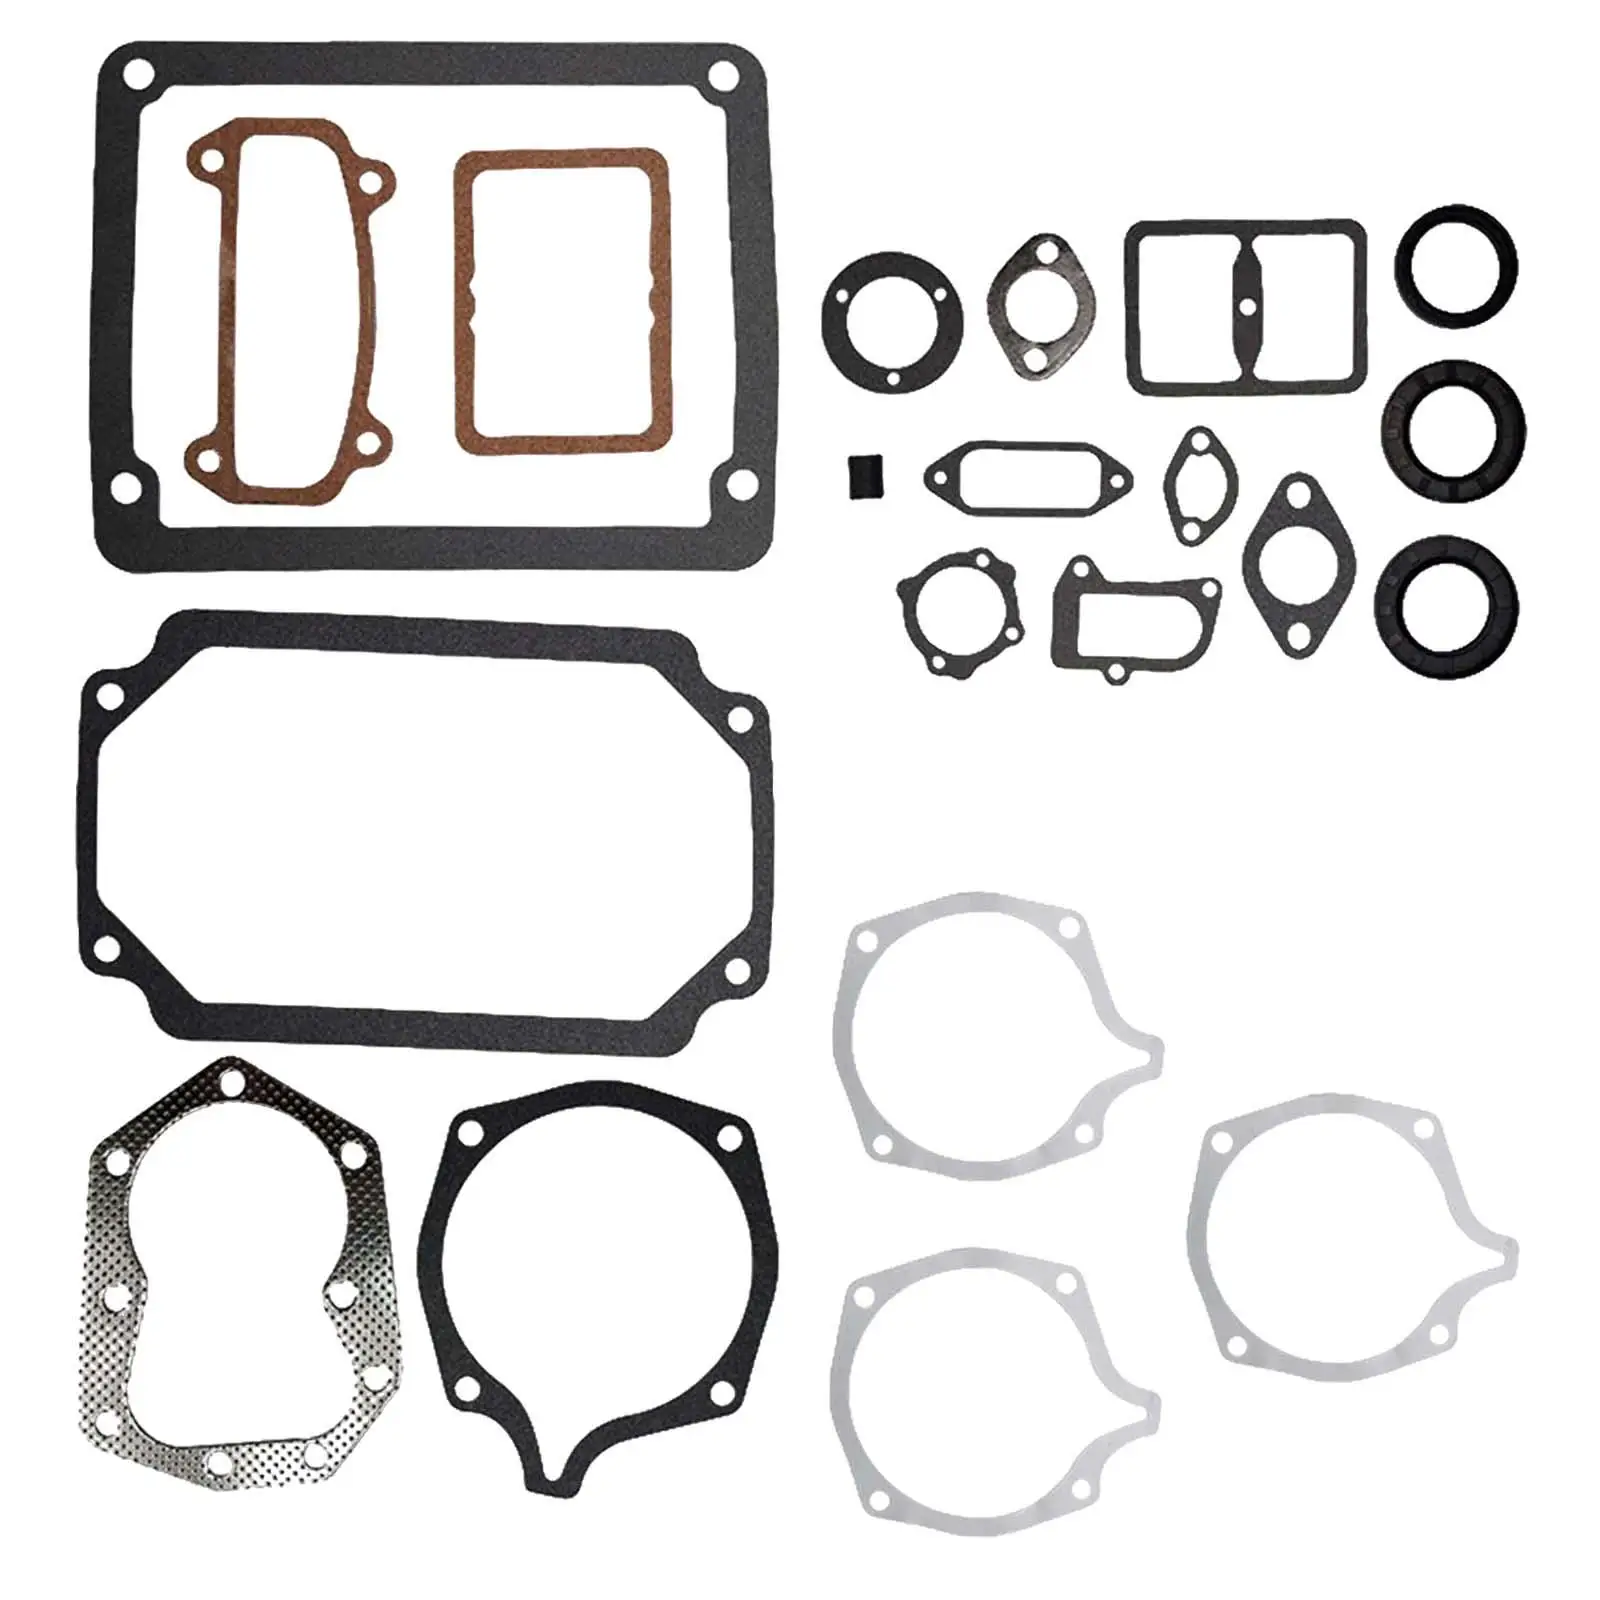 47 755 08-S Gasket Set   Accessories Fits for  K241 Mowers 10 12 14 Engines Horticulture Lawn